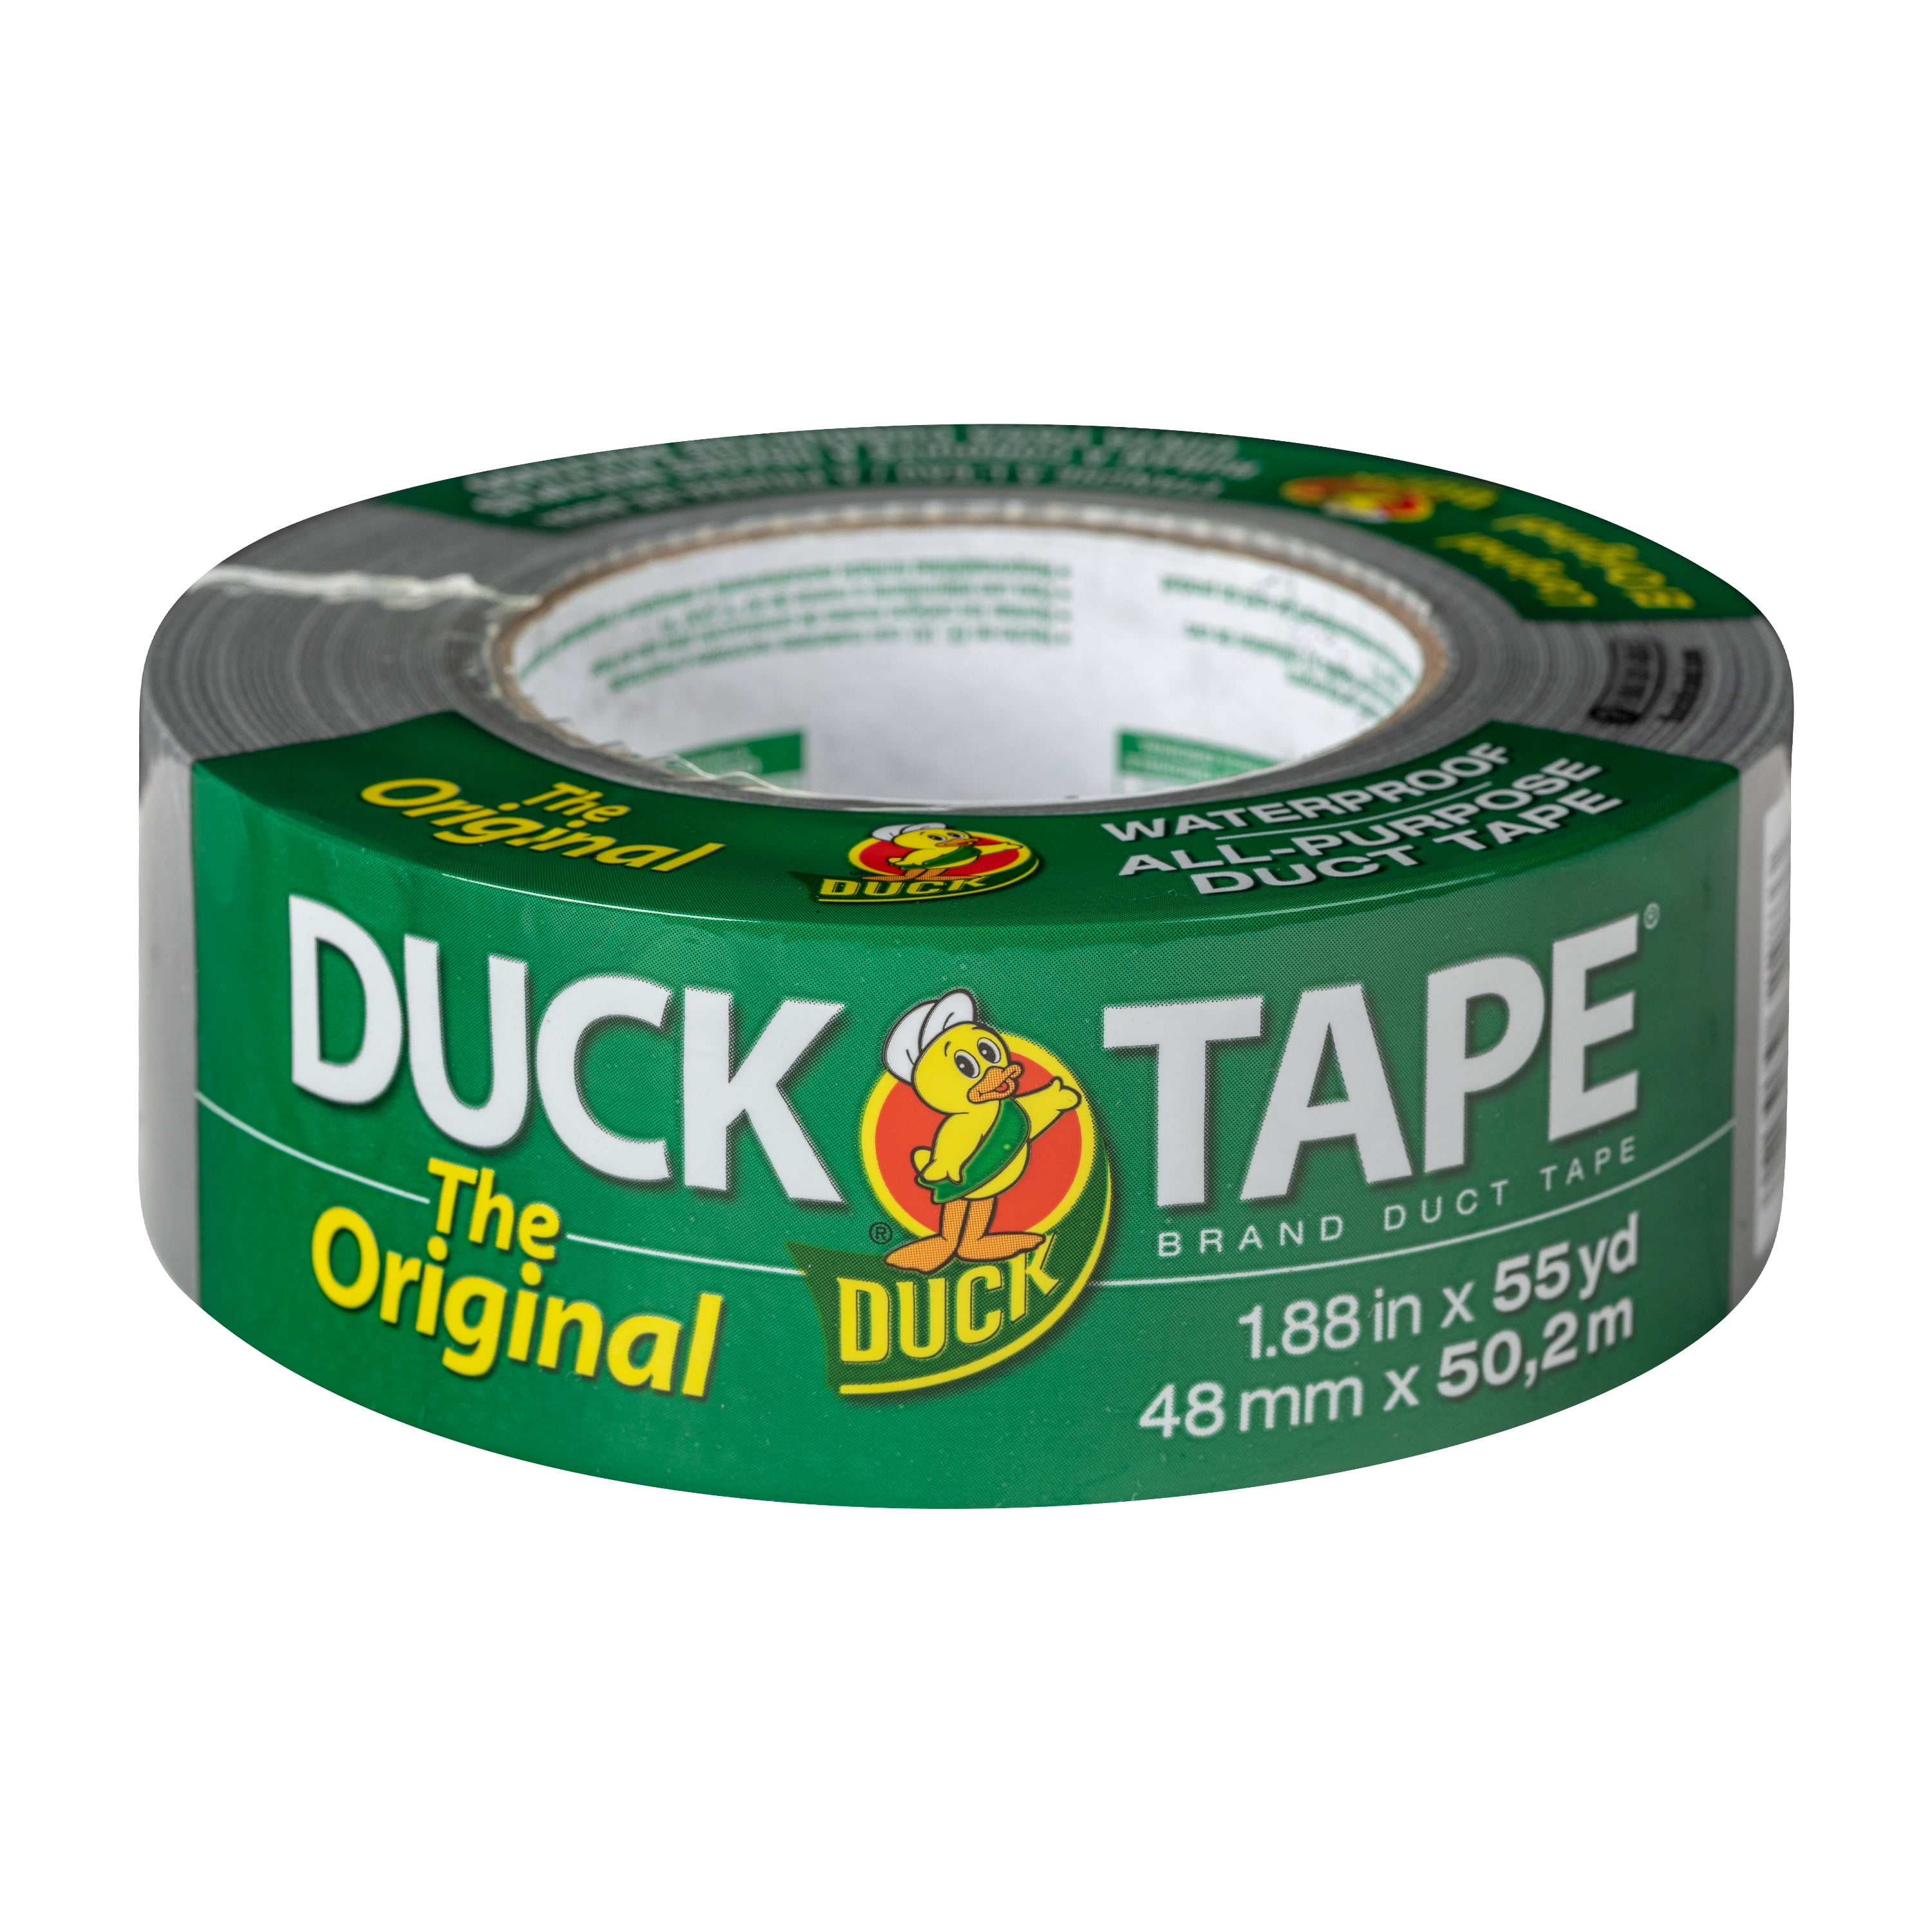 Dill With It Single Roll 1.88 Inches x 10 Yards Duck Brand 282016 Printed Duct Tape